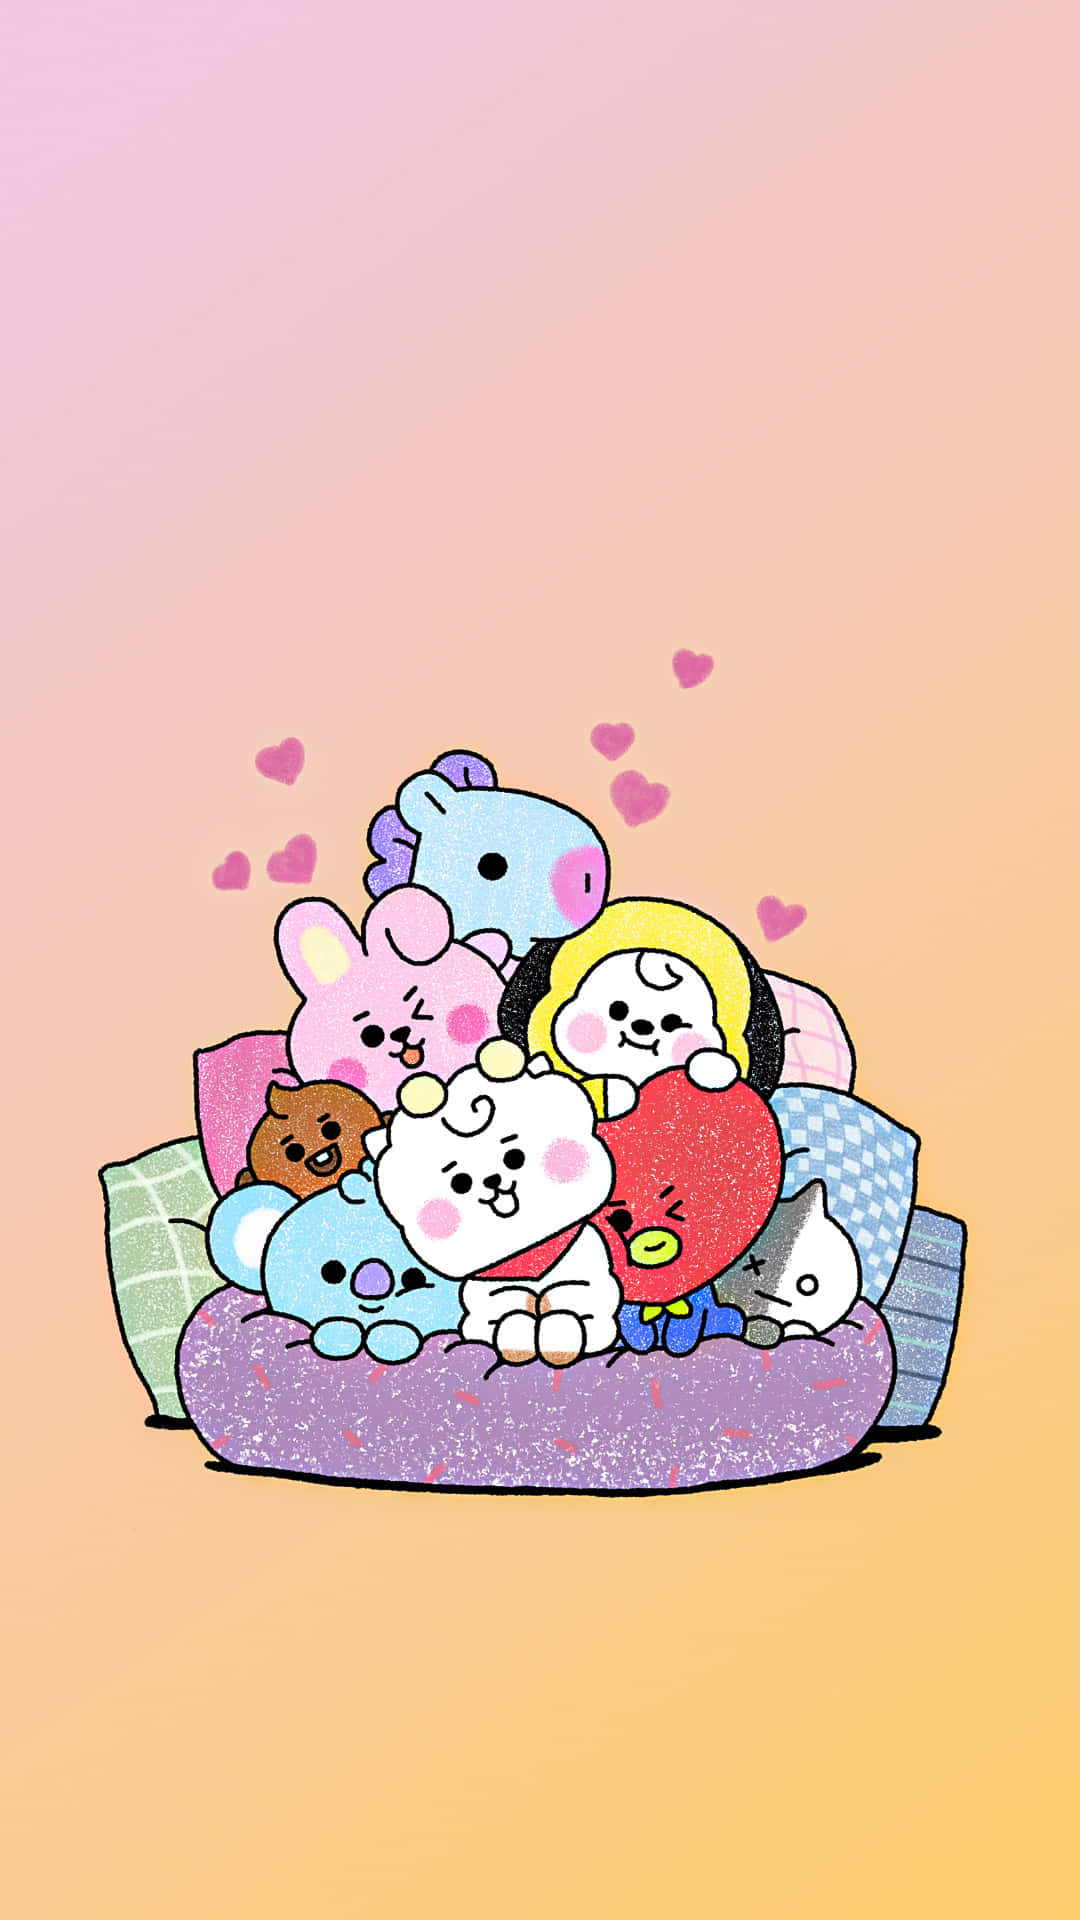 All your favorite BT21 characters in one adorable photo!